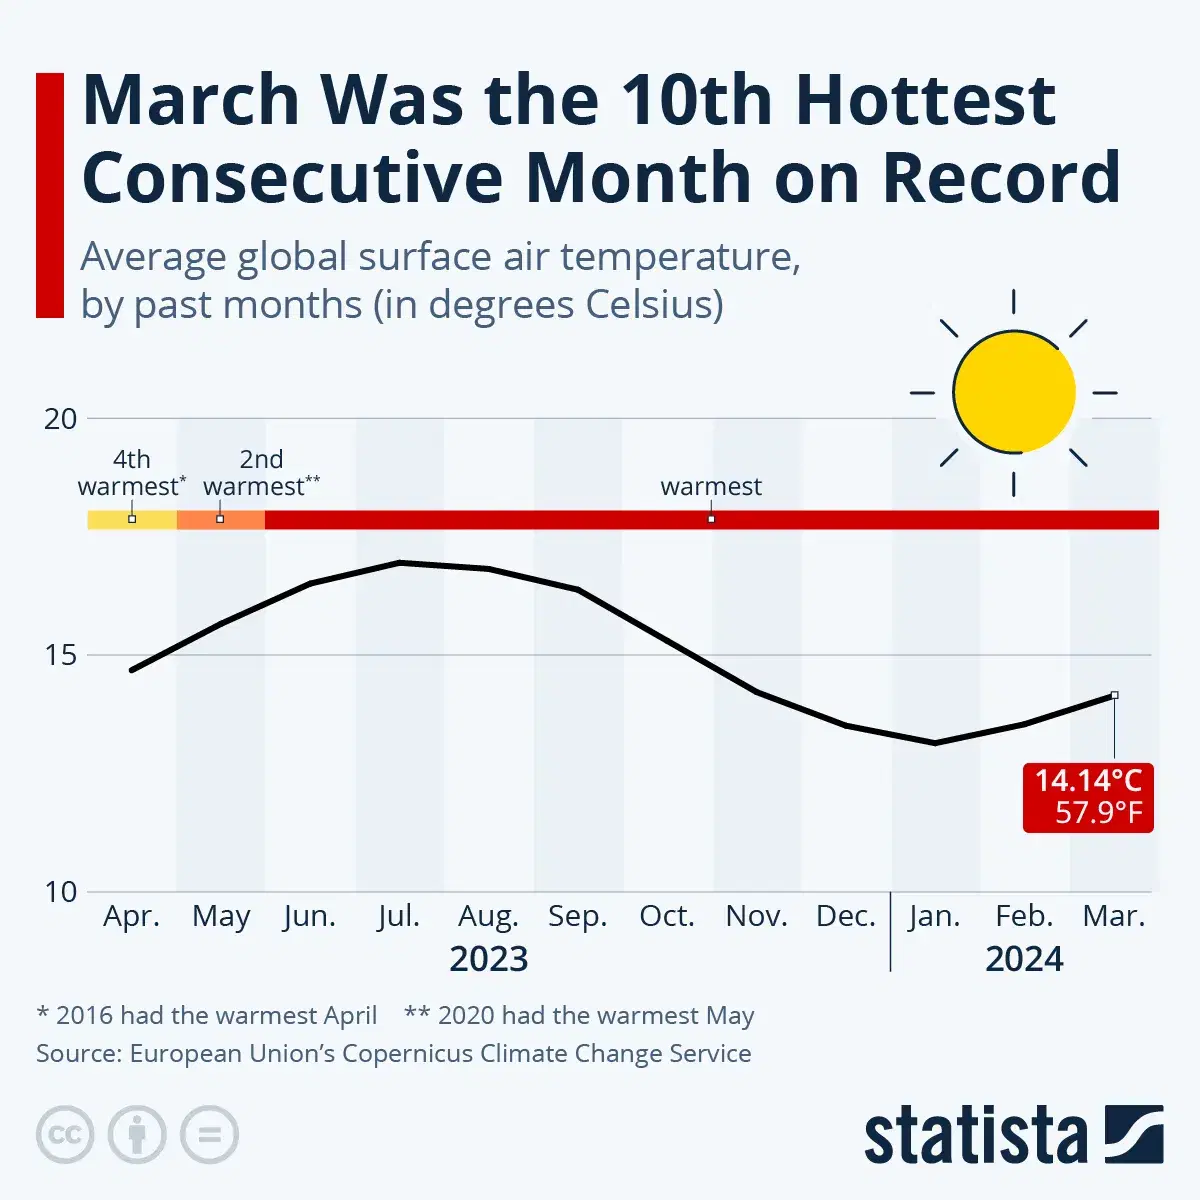 March Was the 10th Hottest Consecutive Month on Record